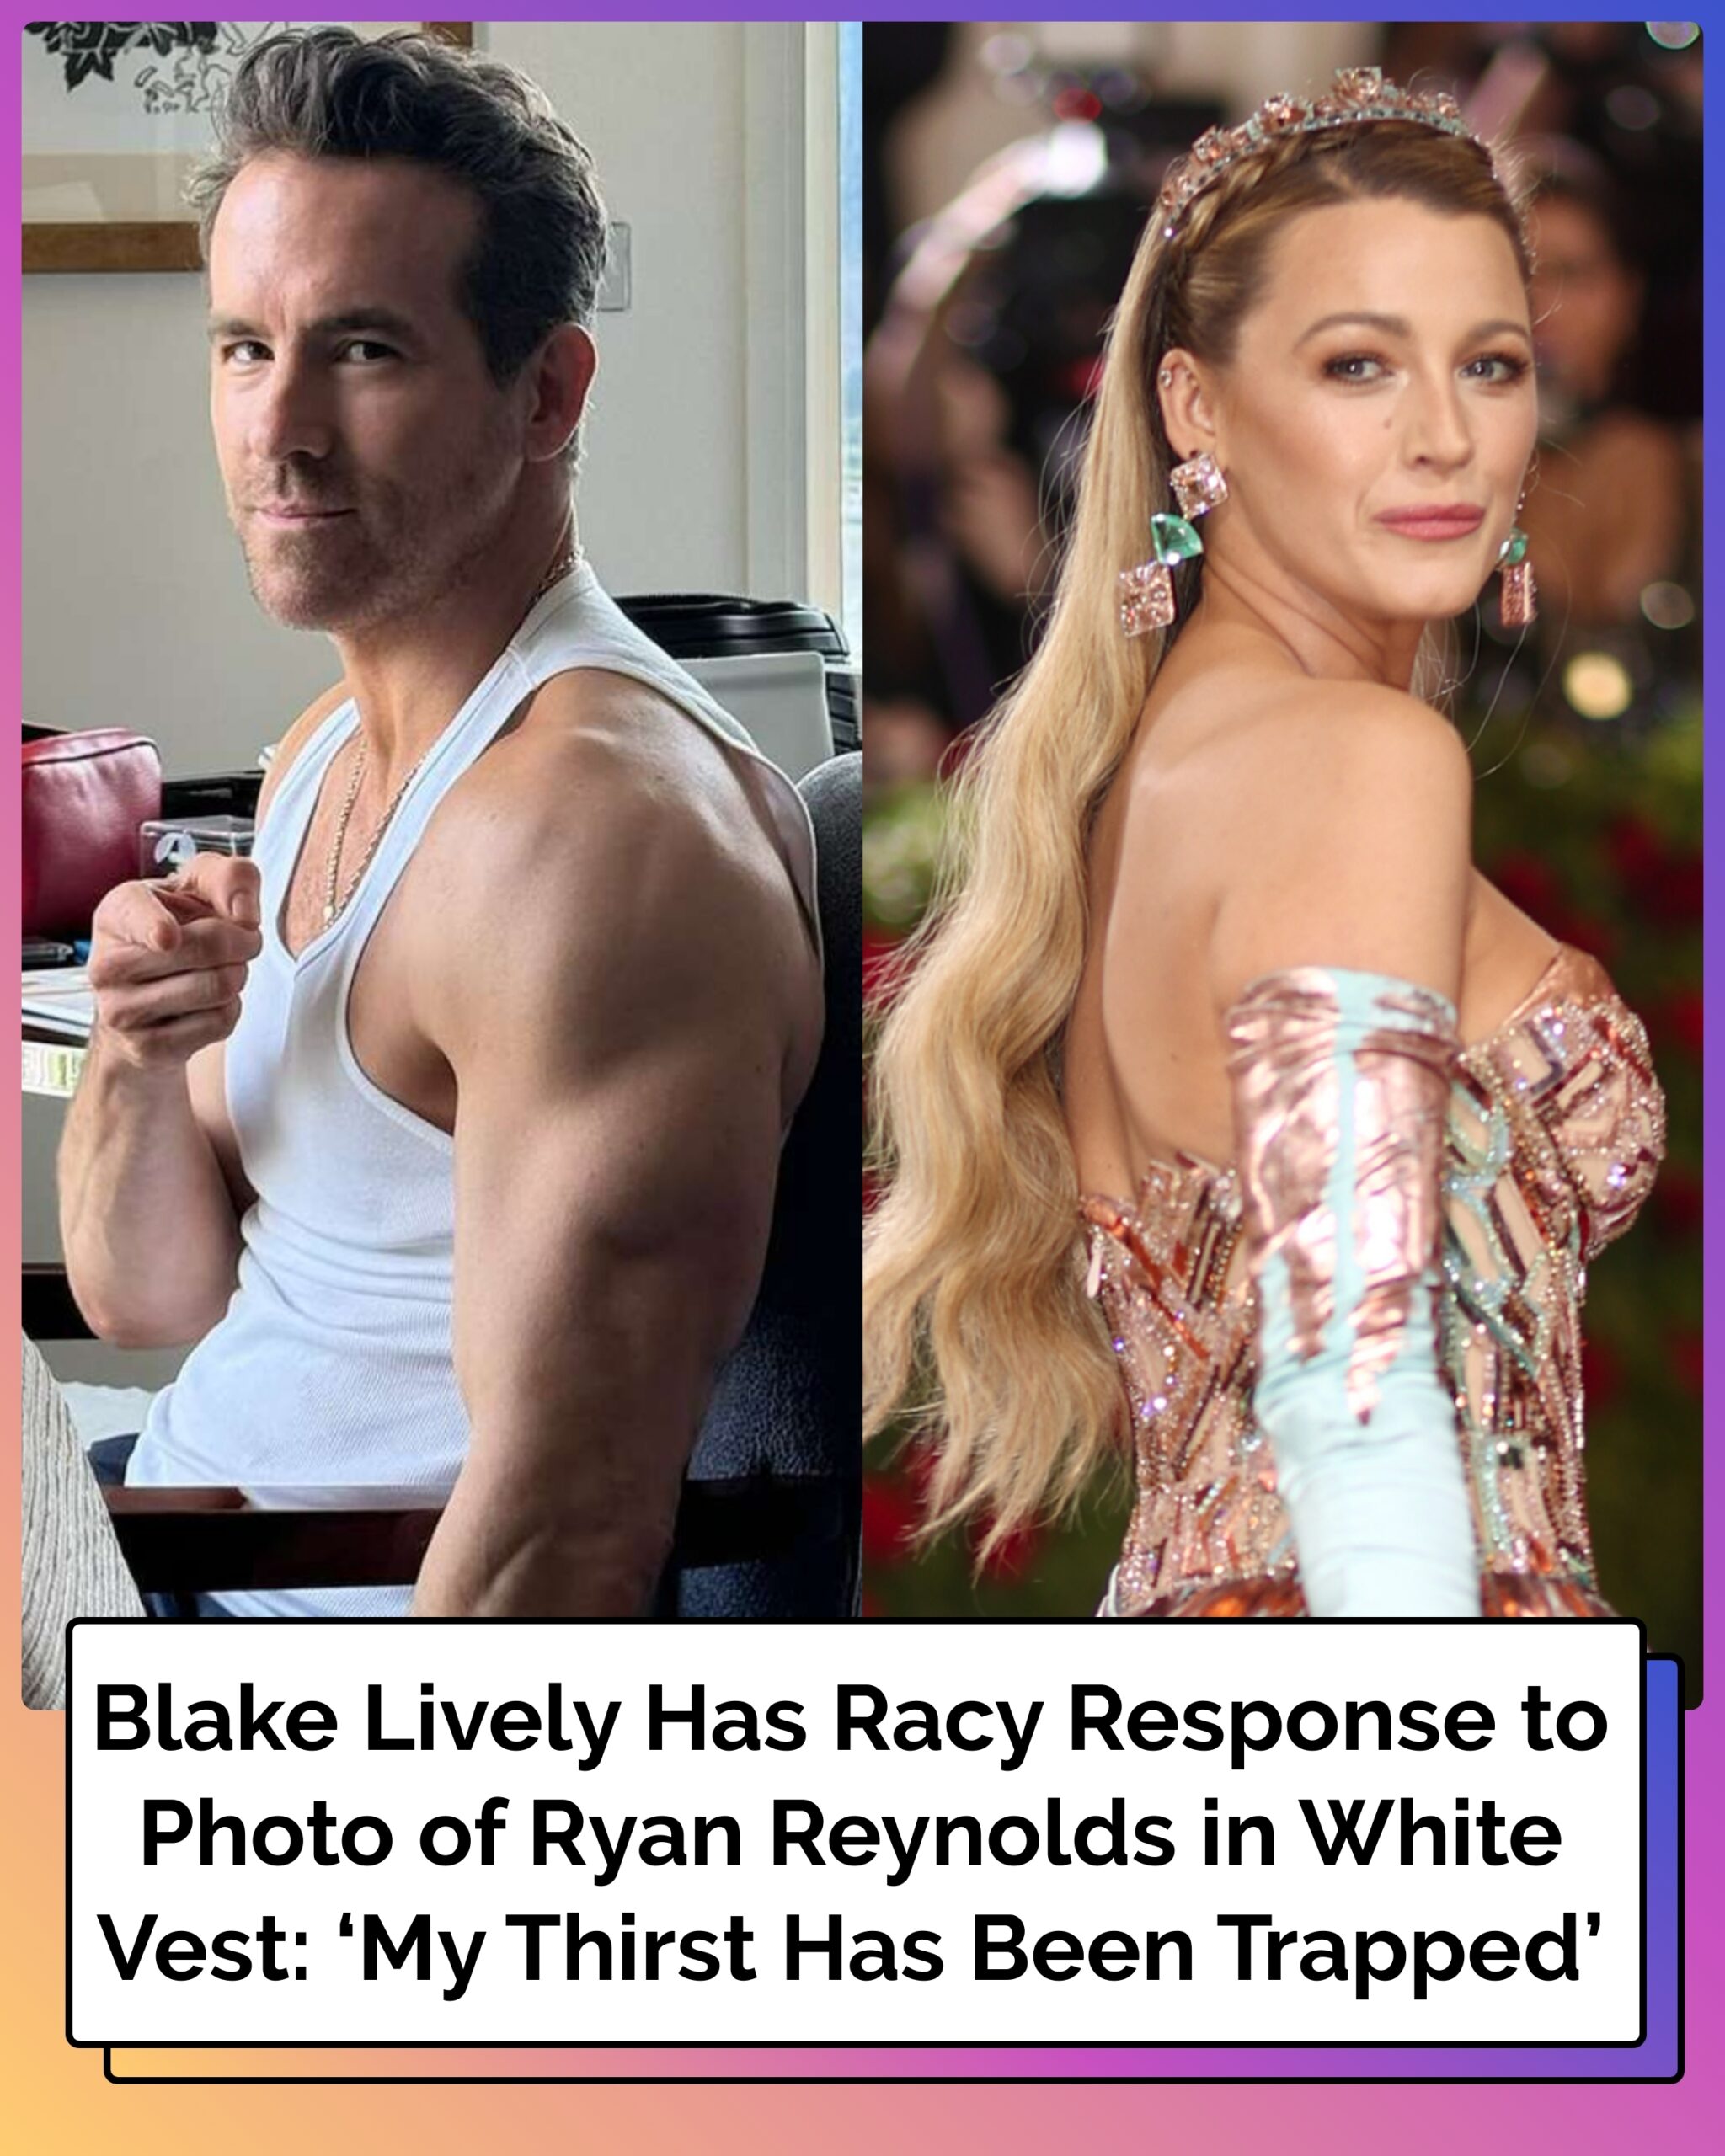 Blake Lively Has Racy Response to Photo of Ryan Reynolds in White Vest: ‘My Thirst Has Been Trapped’